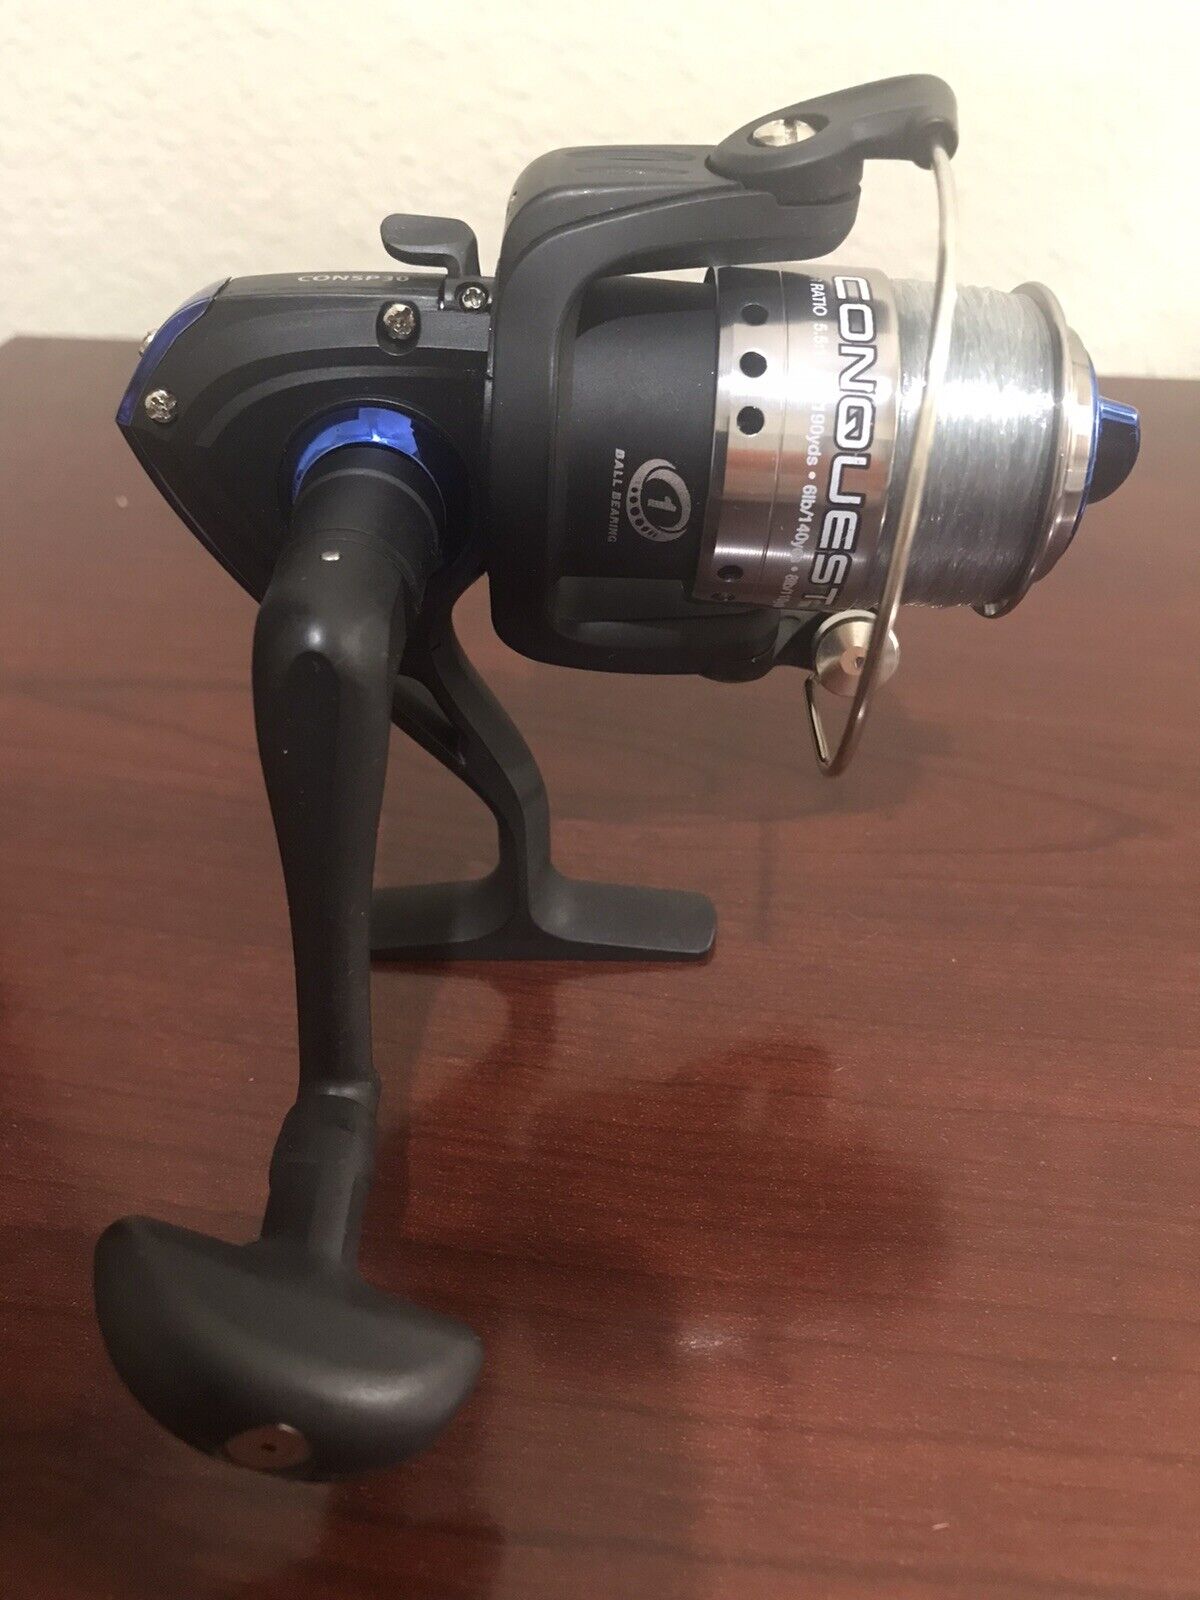 SHAKESPEARE CONQUEST - 30 SPINNING FISHING REEL WITH NEW LINE 6 LB/140 YDS MONO